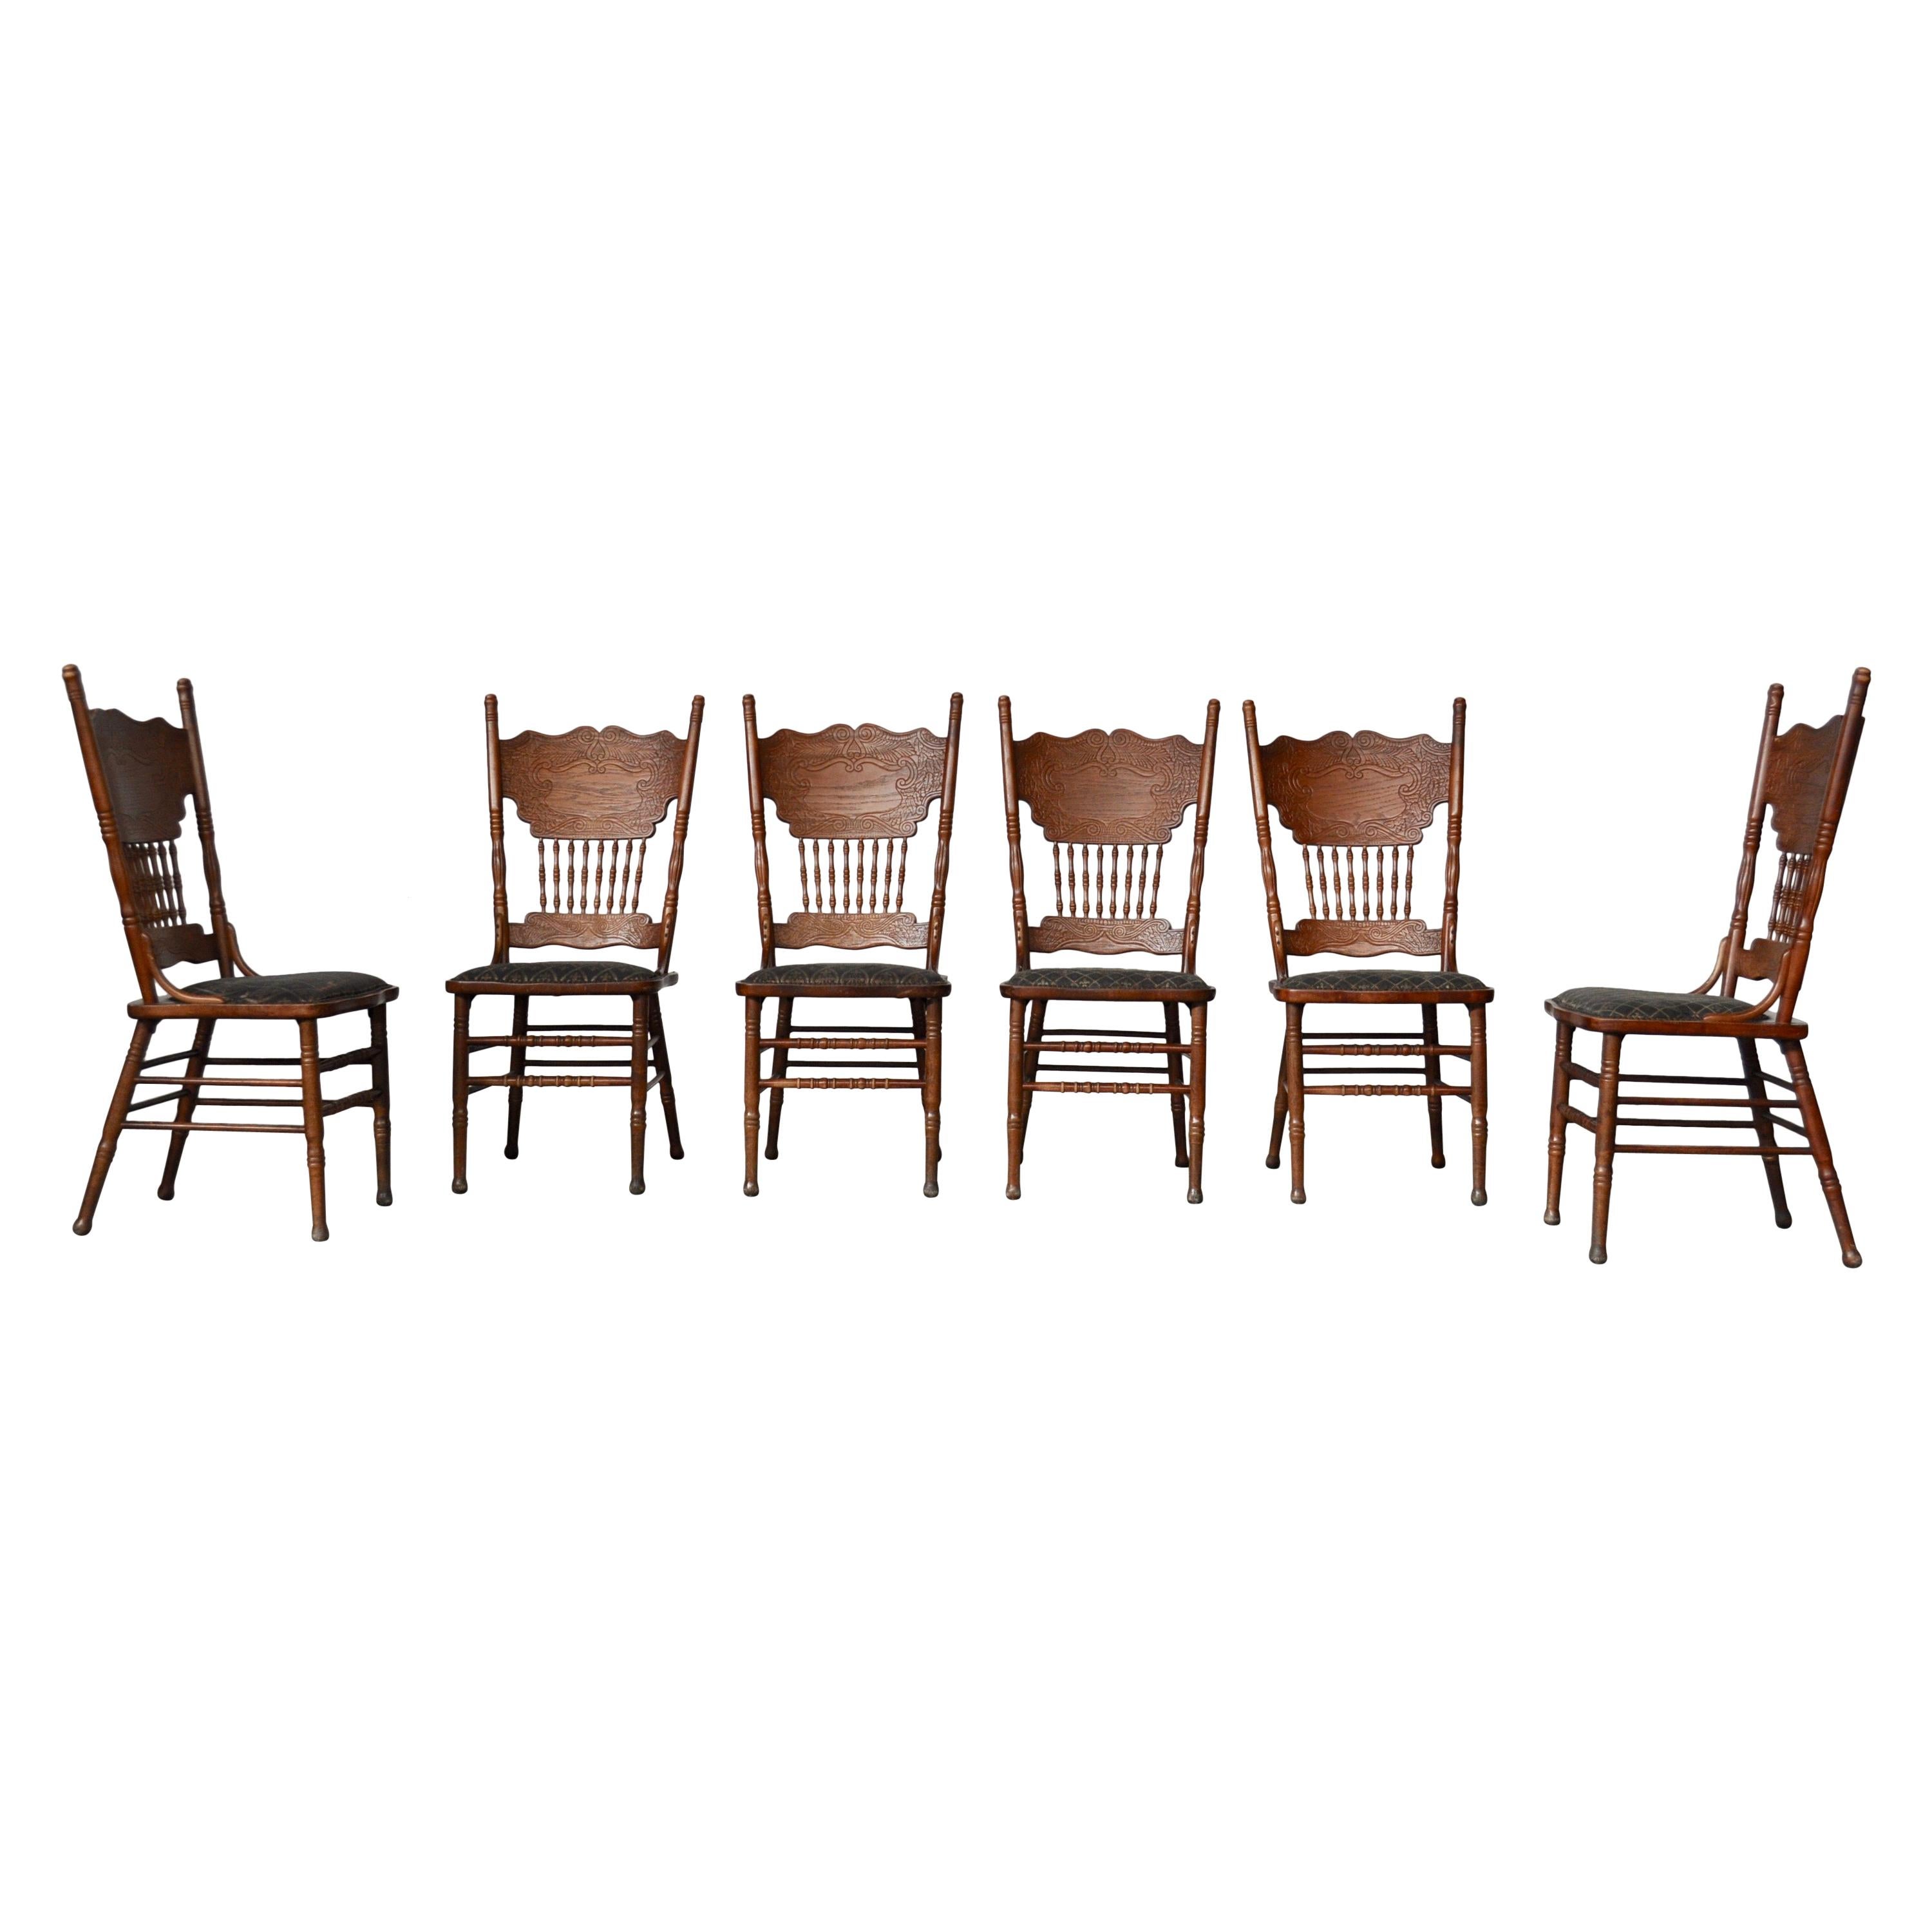 Set of Ashwood Chairs, Austria, 1920s For Sale